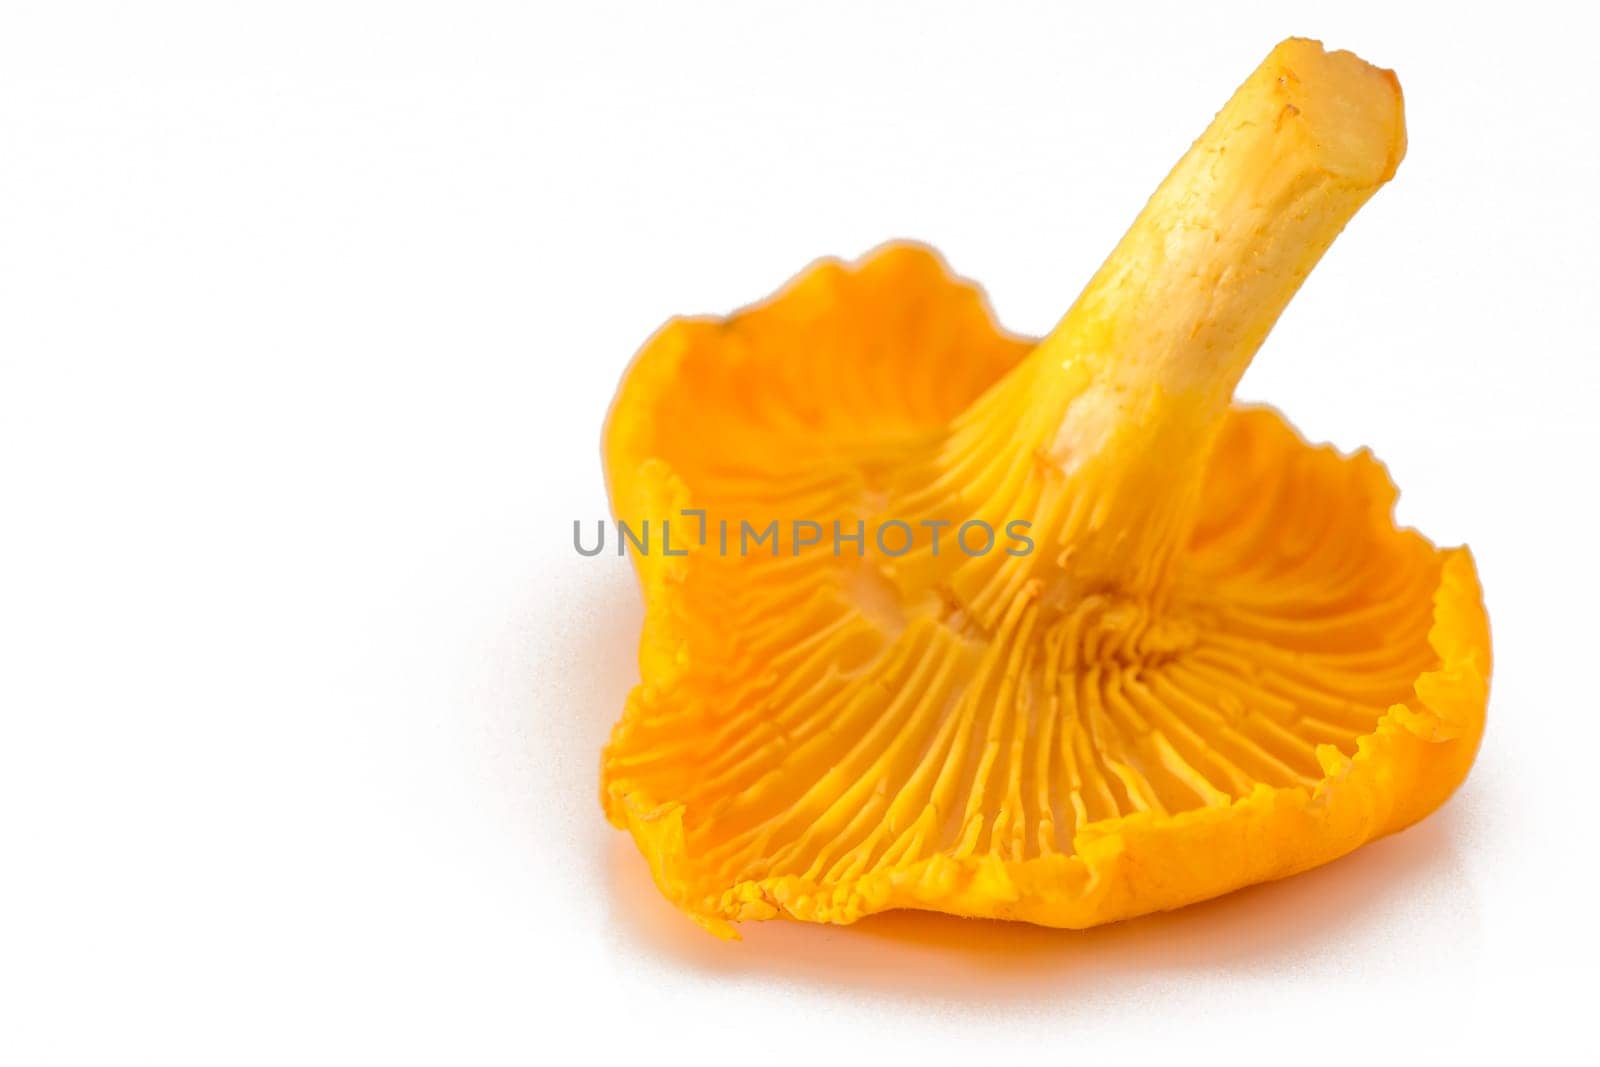 Yellow chanterelle mushrooms isolated on white background by Mixa74